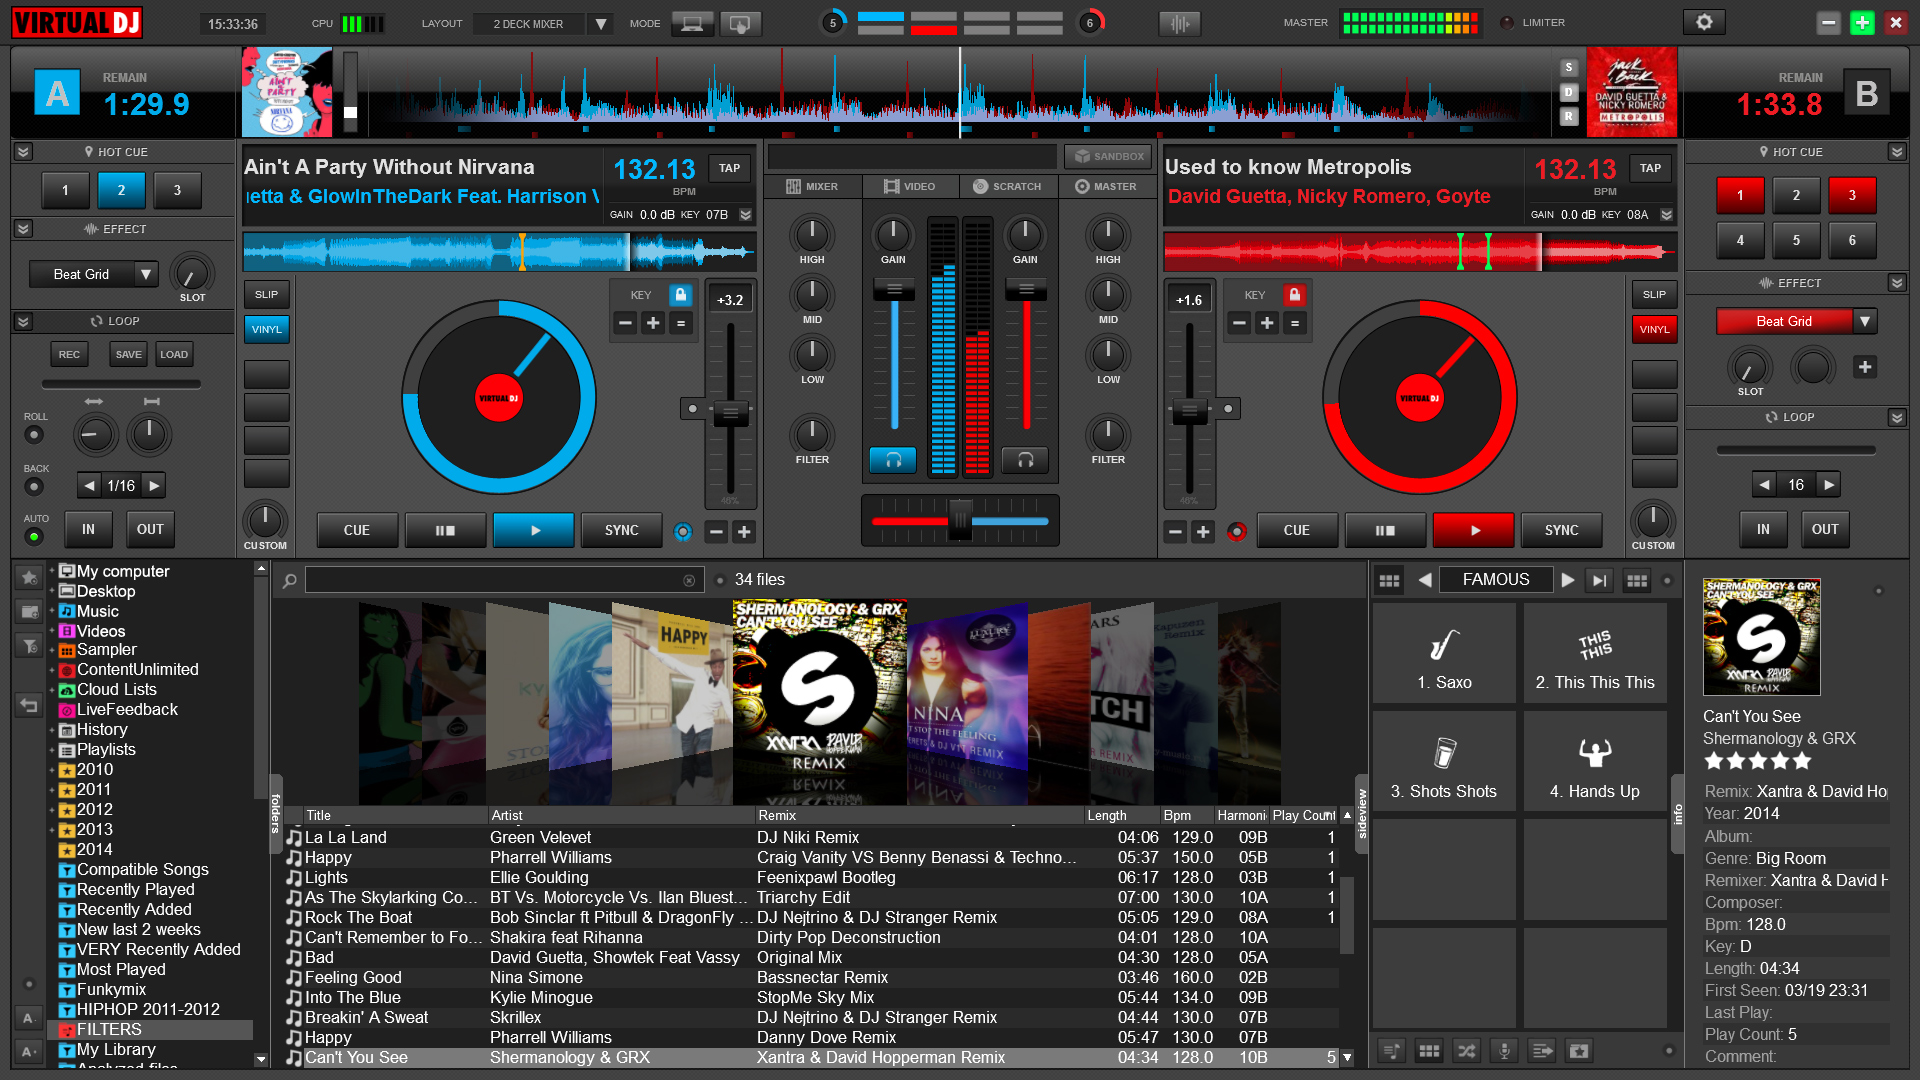 How To Download Virtual Dj 7 Full Version For Free